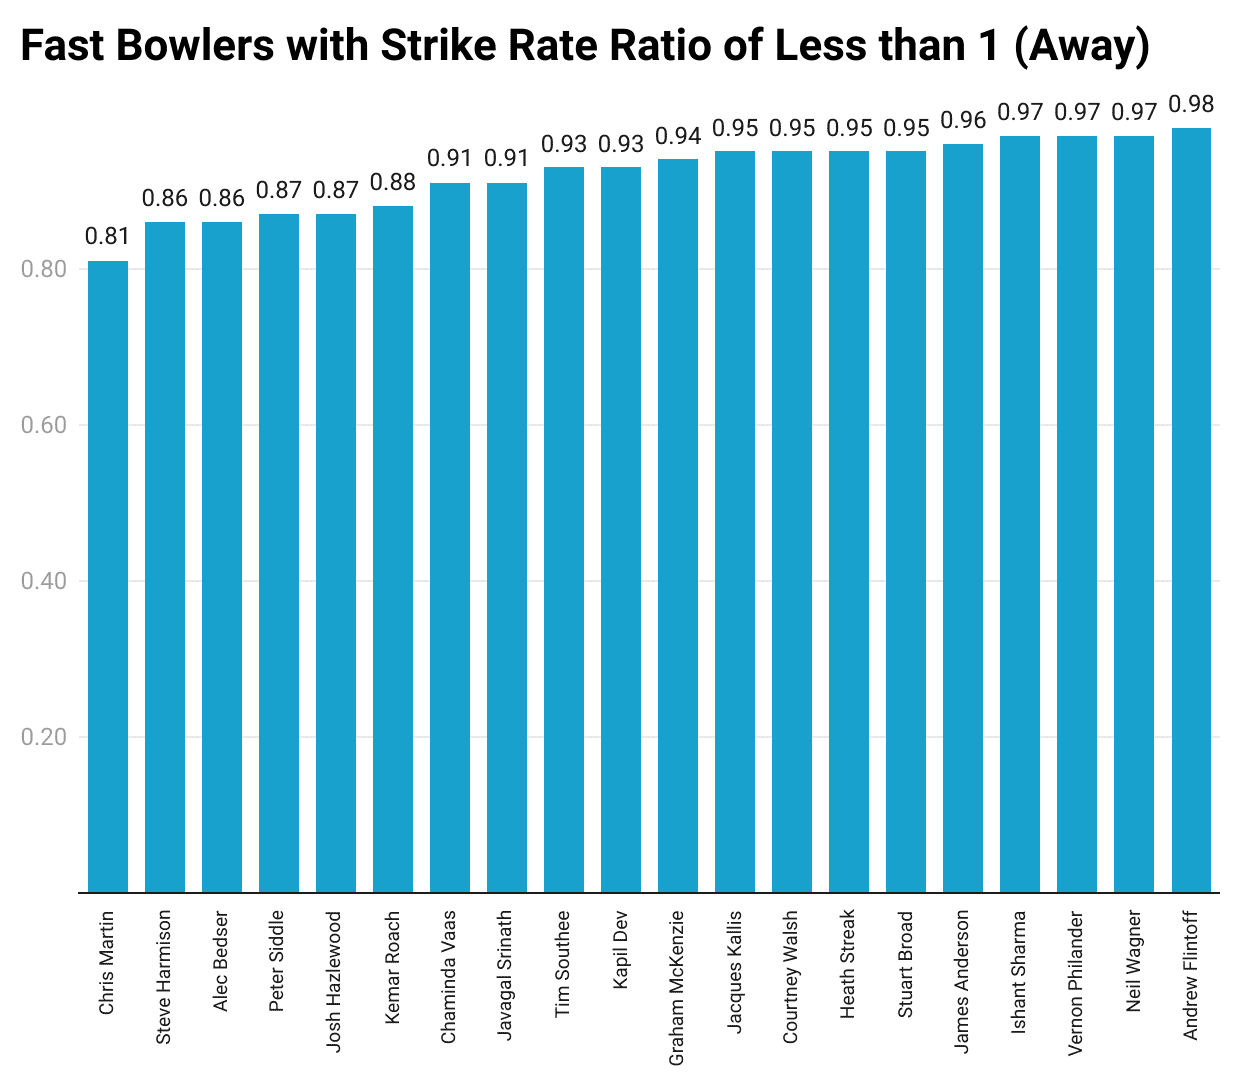 Fast Bowlers with Away Strike Rate Ratio of Less than 1